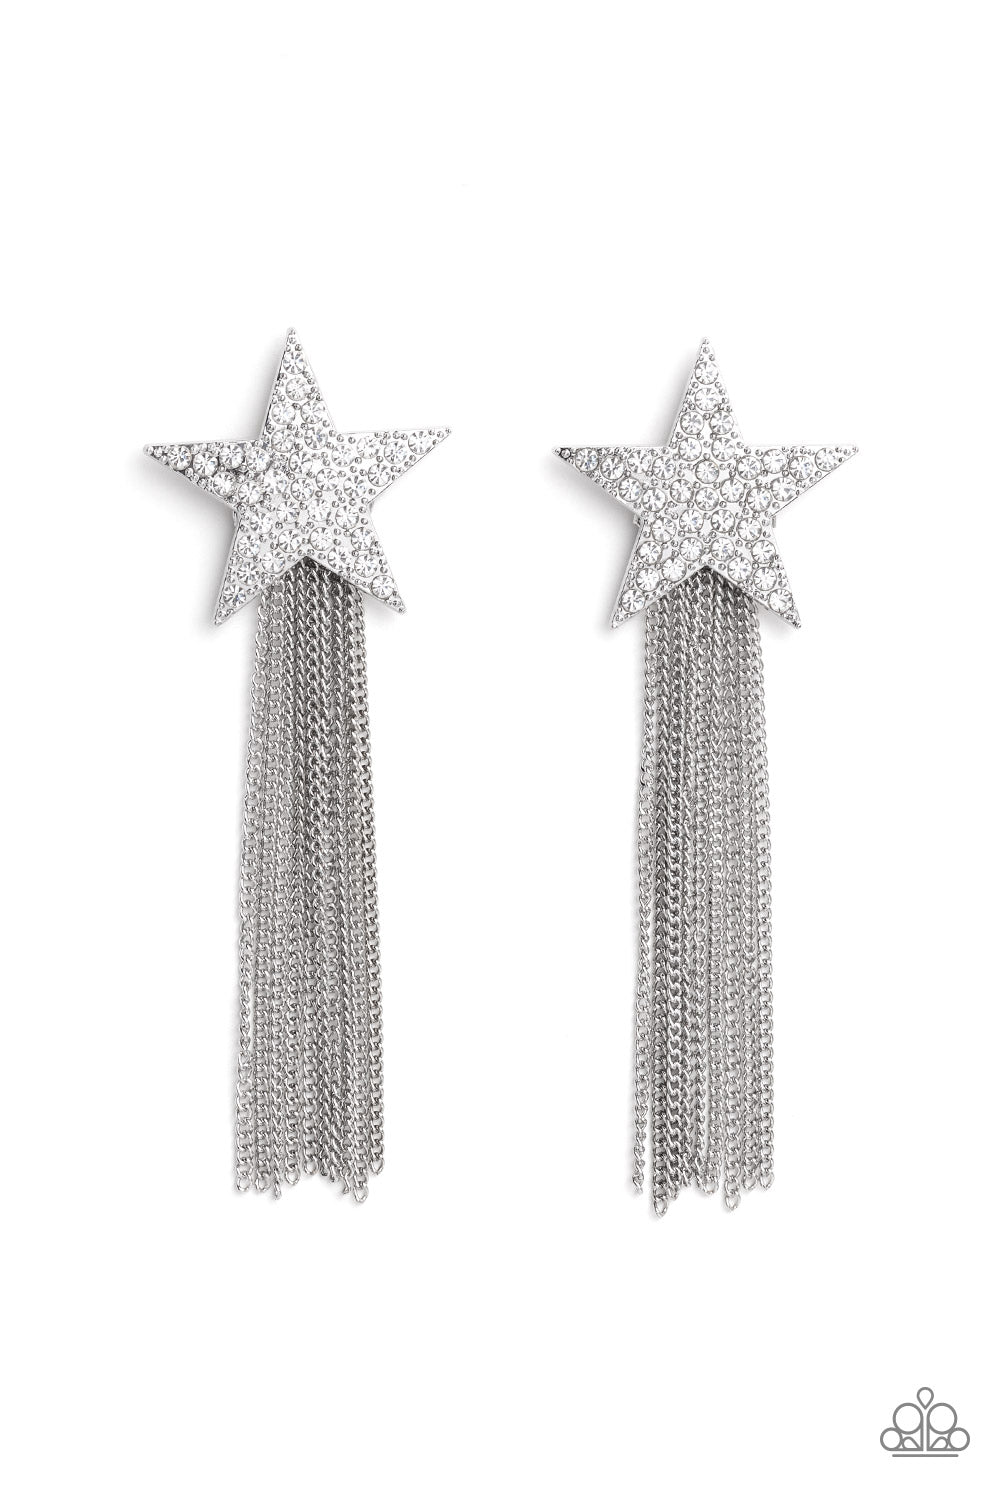 Superstar Solo White Earrings - Paparazzi Accessories- lightbox - CarasShop.com - $5 Jewelry by Cara Jewels